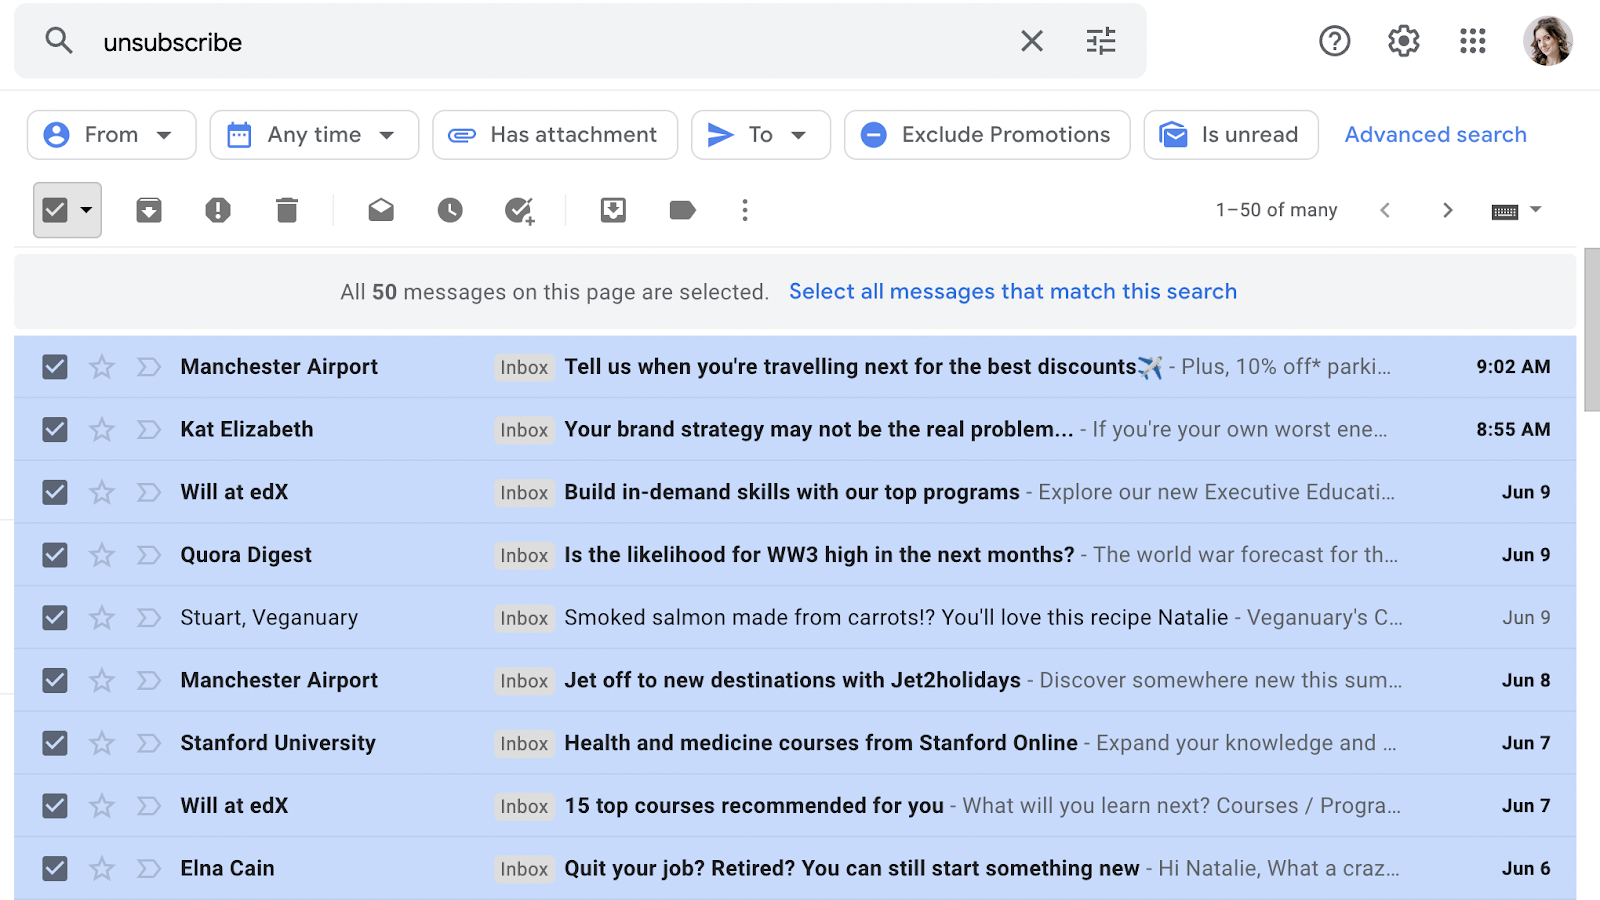 bulk unsubscribe in Gmail